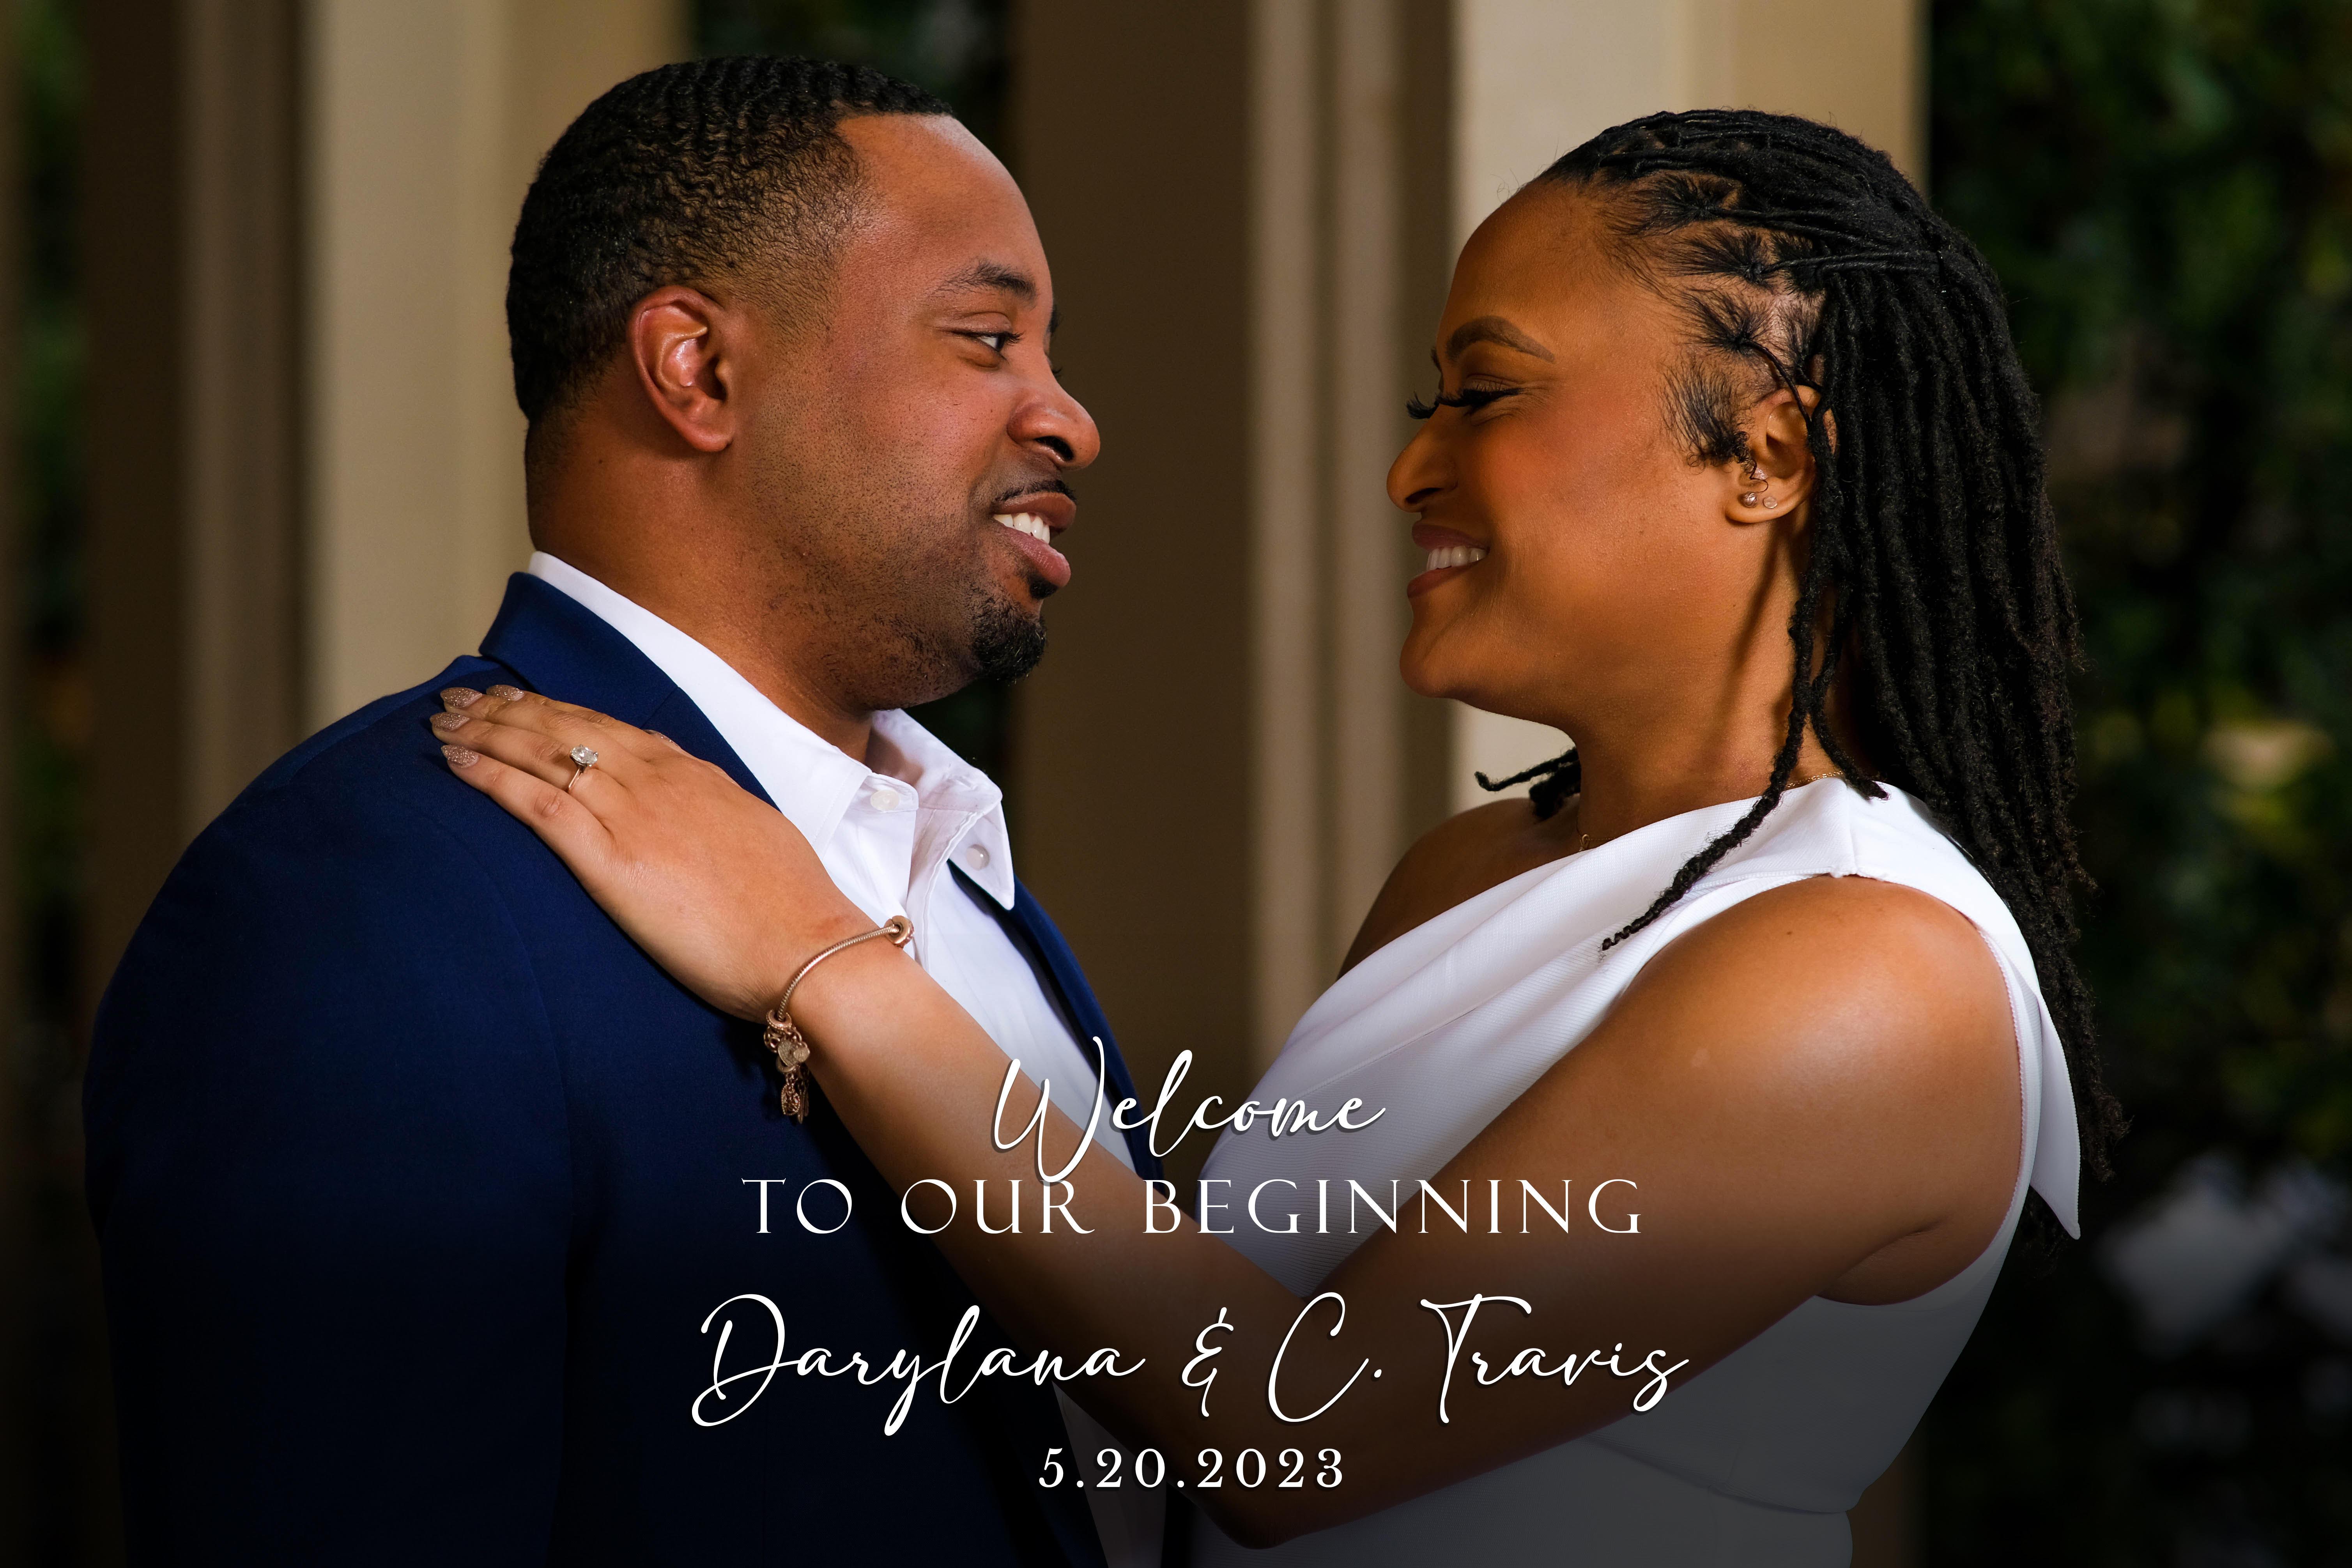 The Wedding Website of Darylana Antoinette Cain and C.Travis Johnson